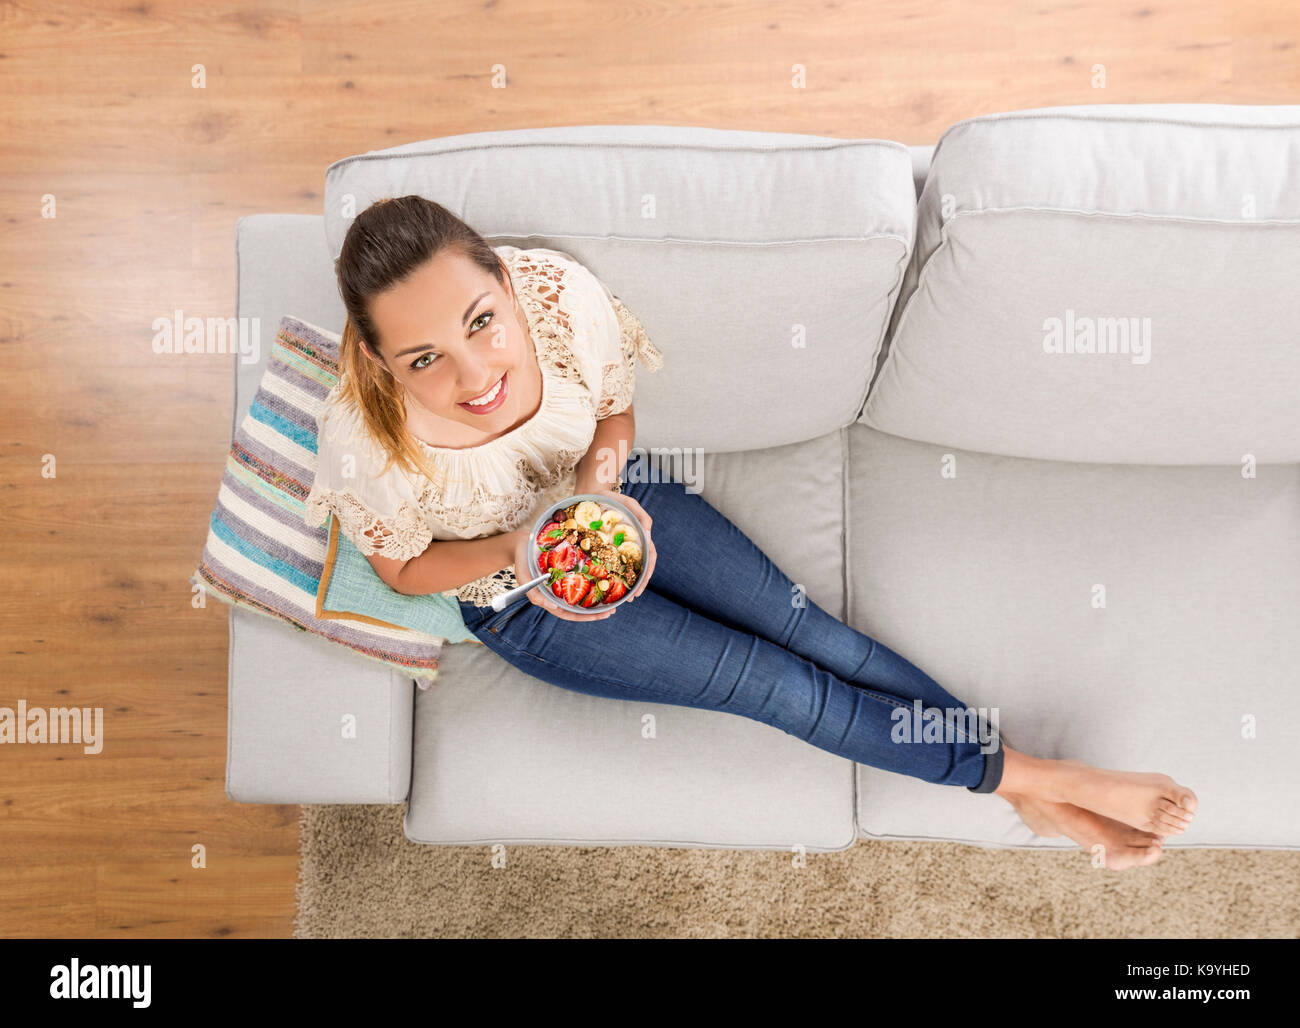 Top viw of a beautiful woman at home eating a healthy bowl Stock Photo